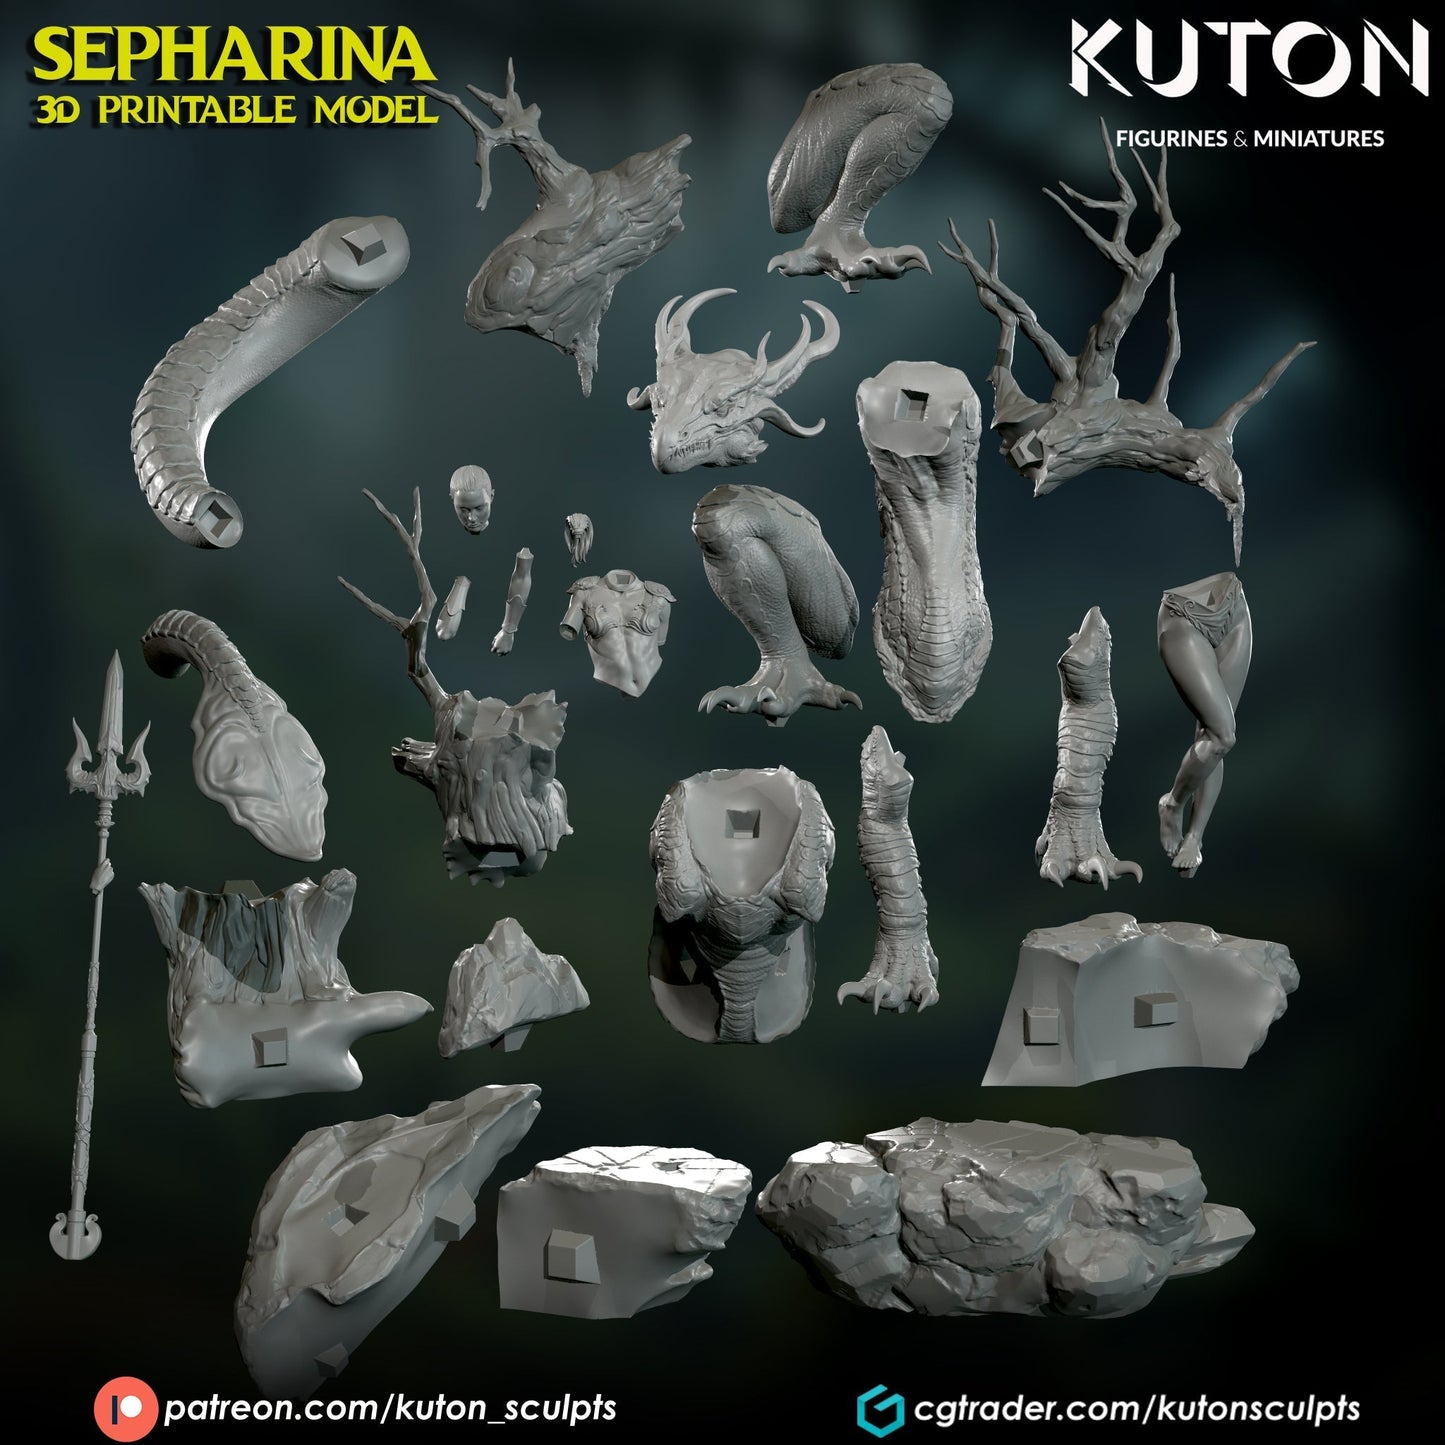 Sepharina Resin Model Fun Art by KUTON Scale models and Collectibles